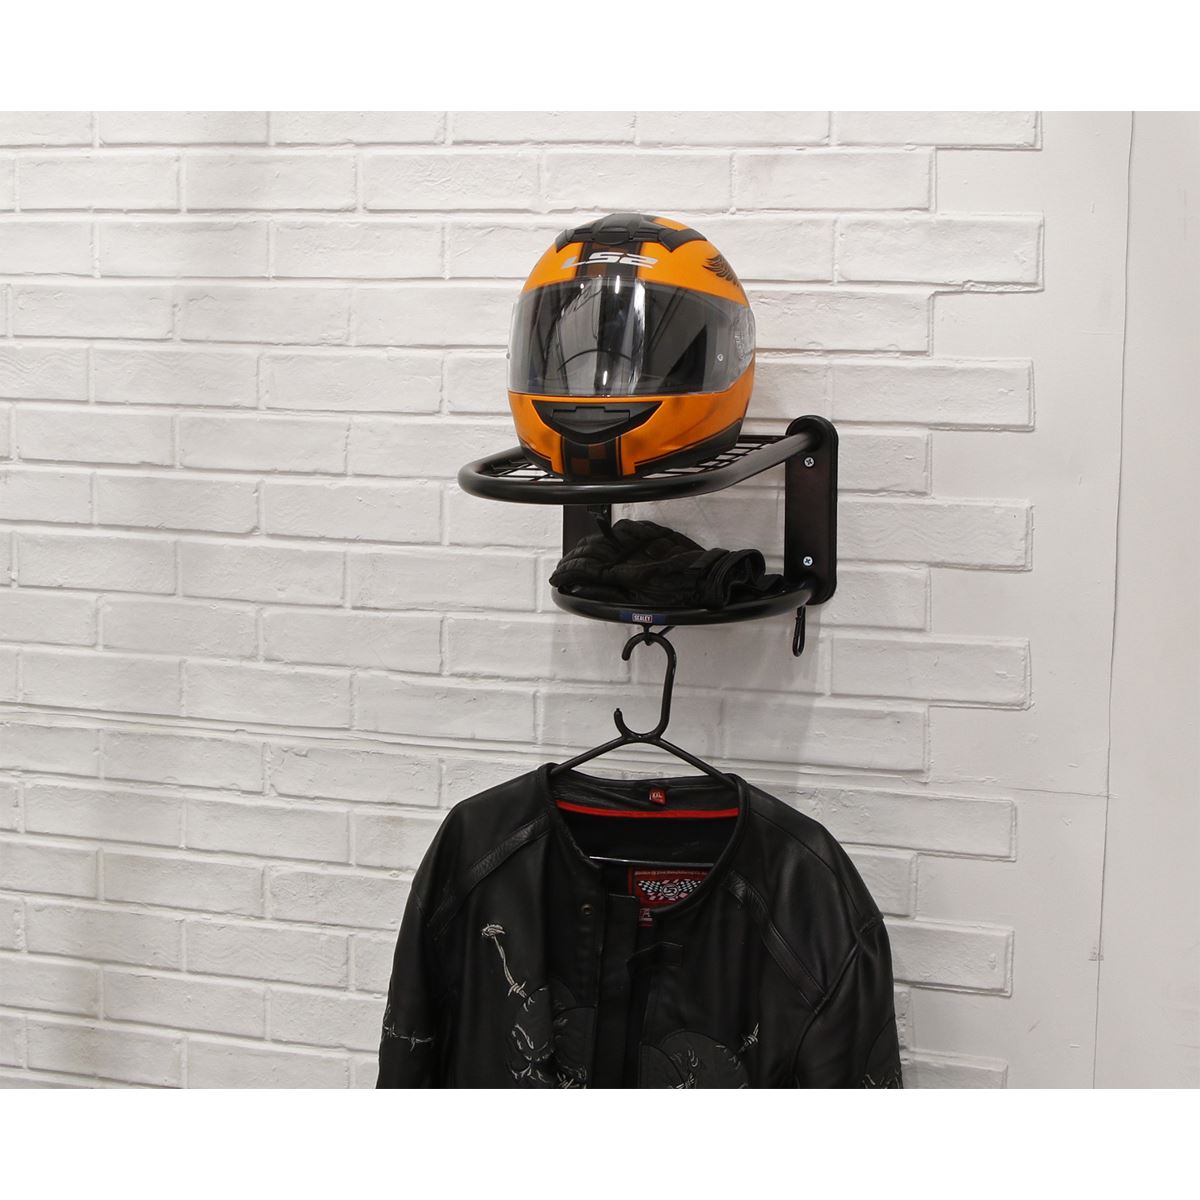 Sealey Motorcycle Helmet, Clothing and Gear Tidy Wall Mounted Shelf Rack 240mm x 405mm